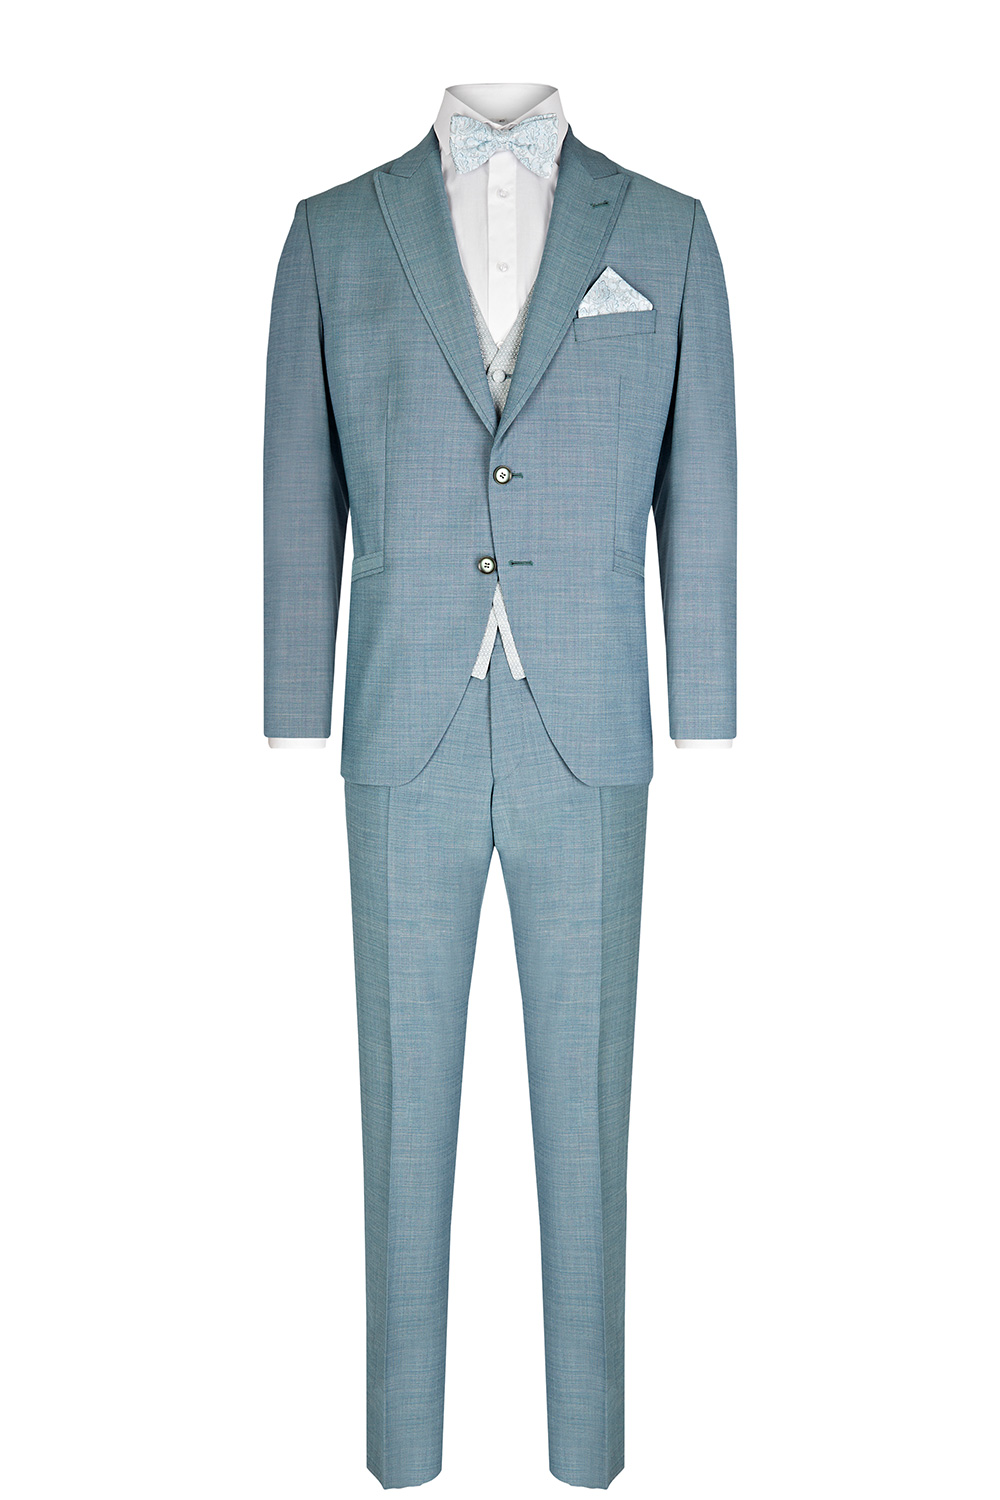 Green Blue 3 piece Wedding Suit - Tom Murphy's Formal and Menswear